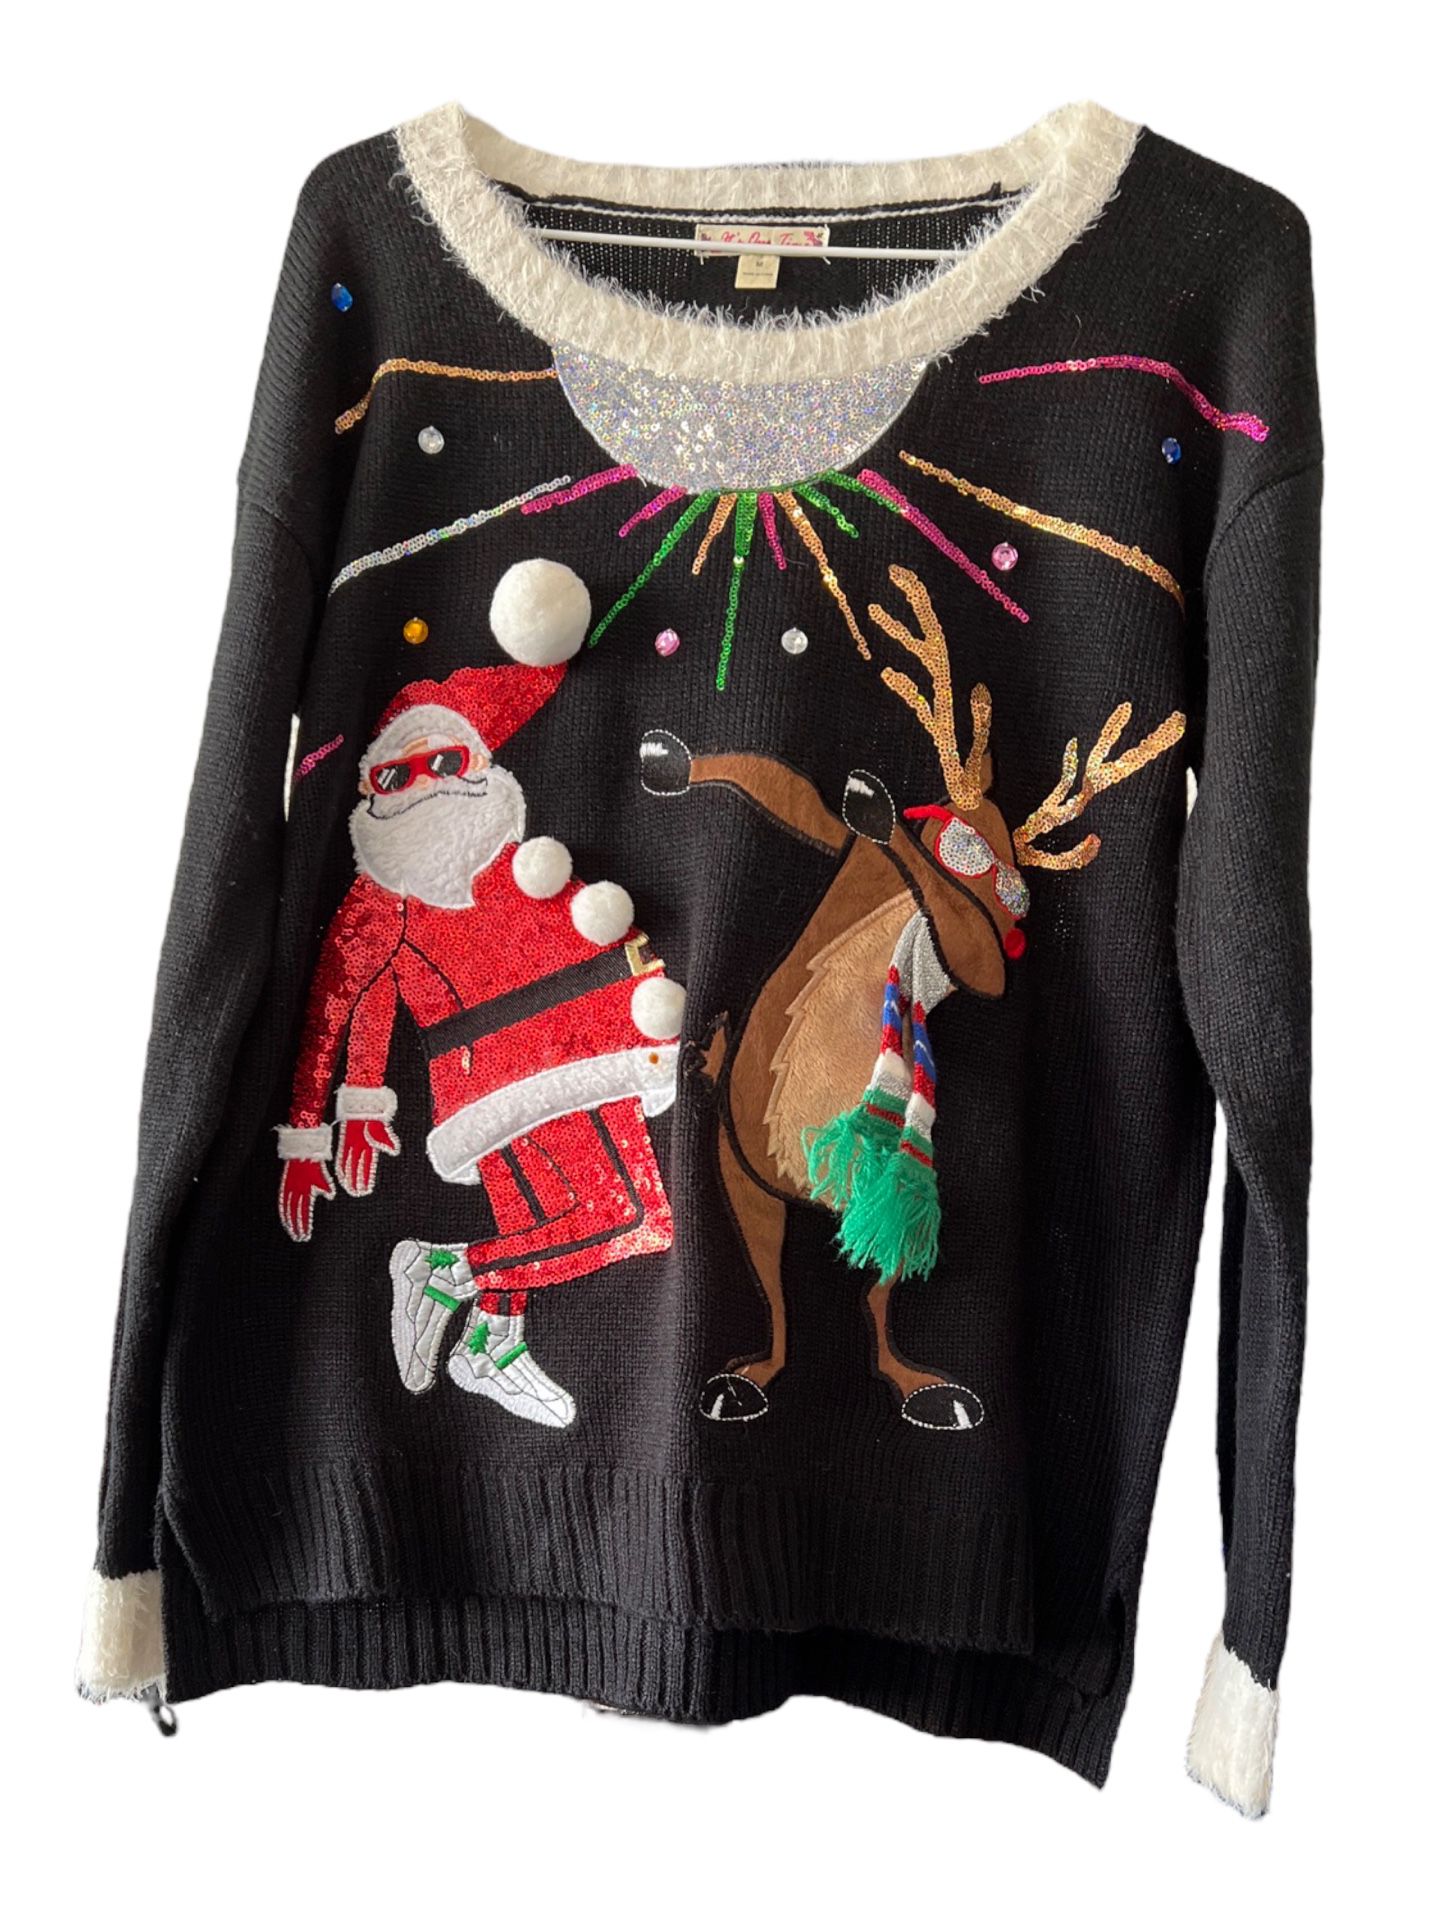 it’s our time santa rudolf dance sequin christmas sweater womens M.  Comes from a smoke and pet free household  Measurements in the pictures  B22 